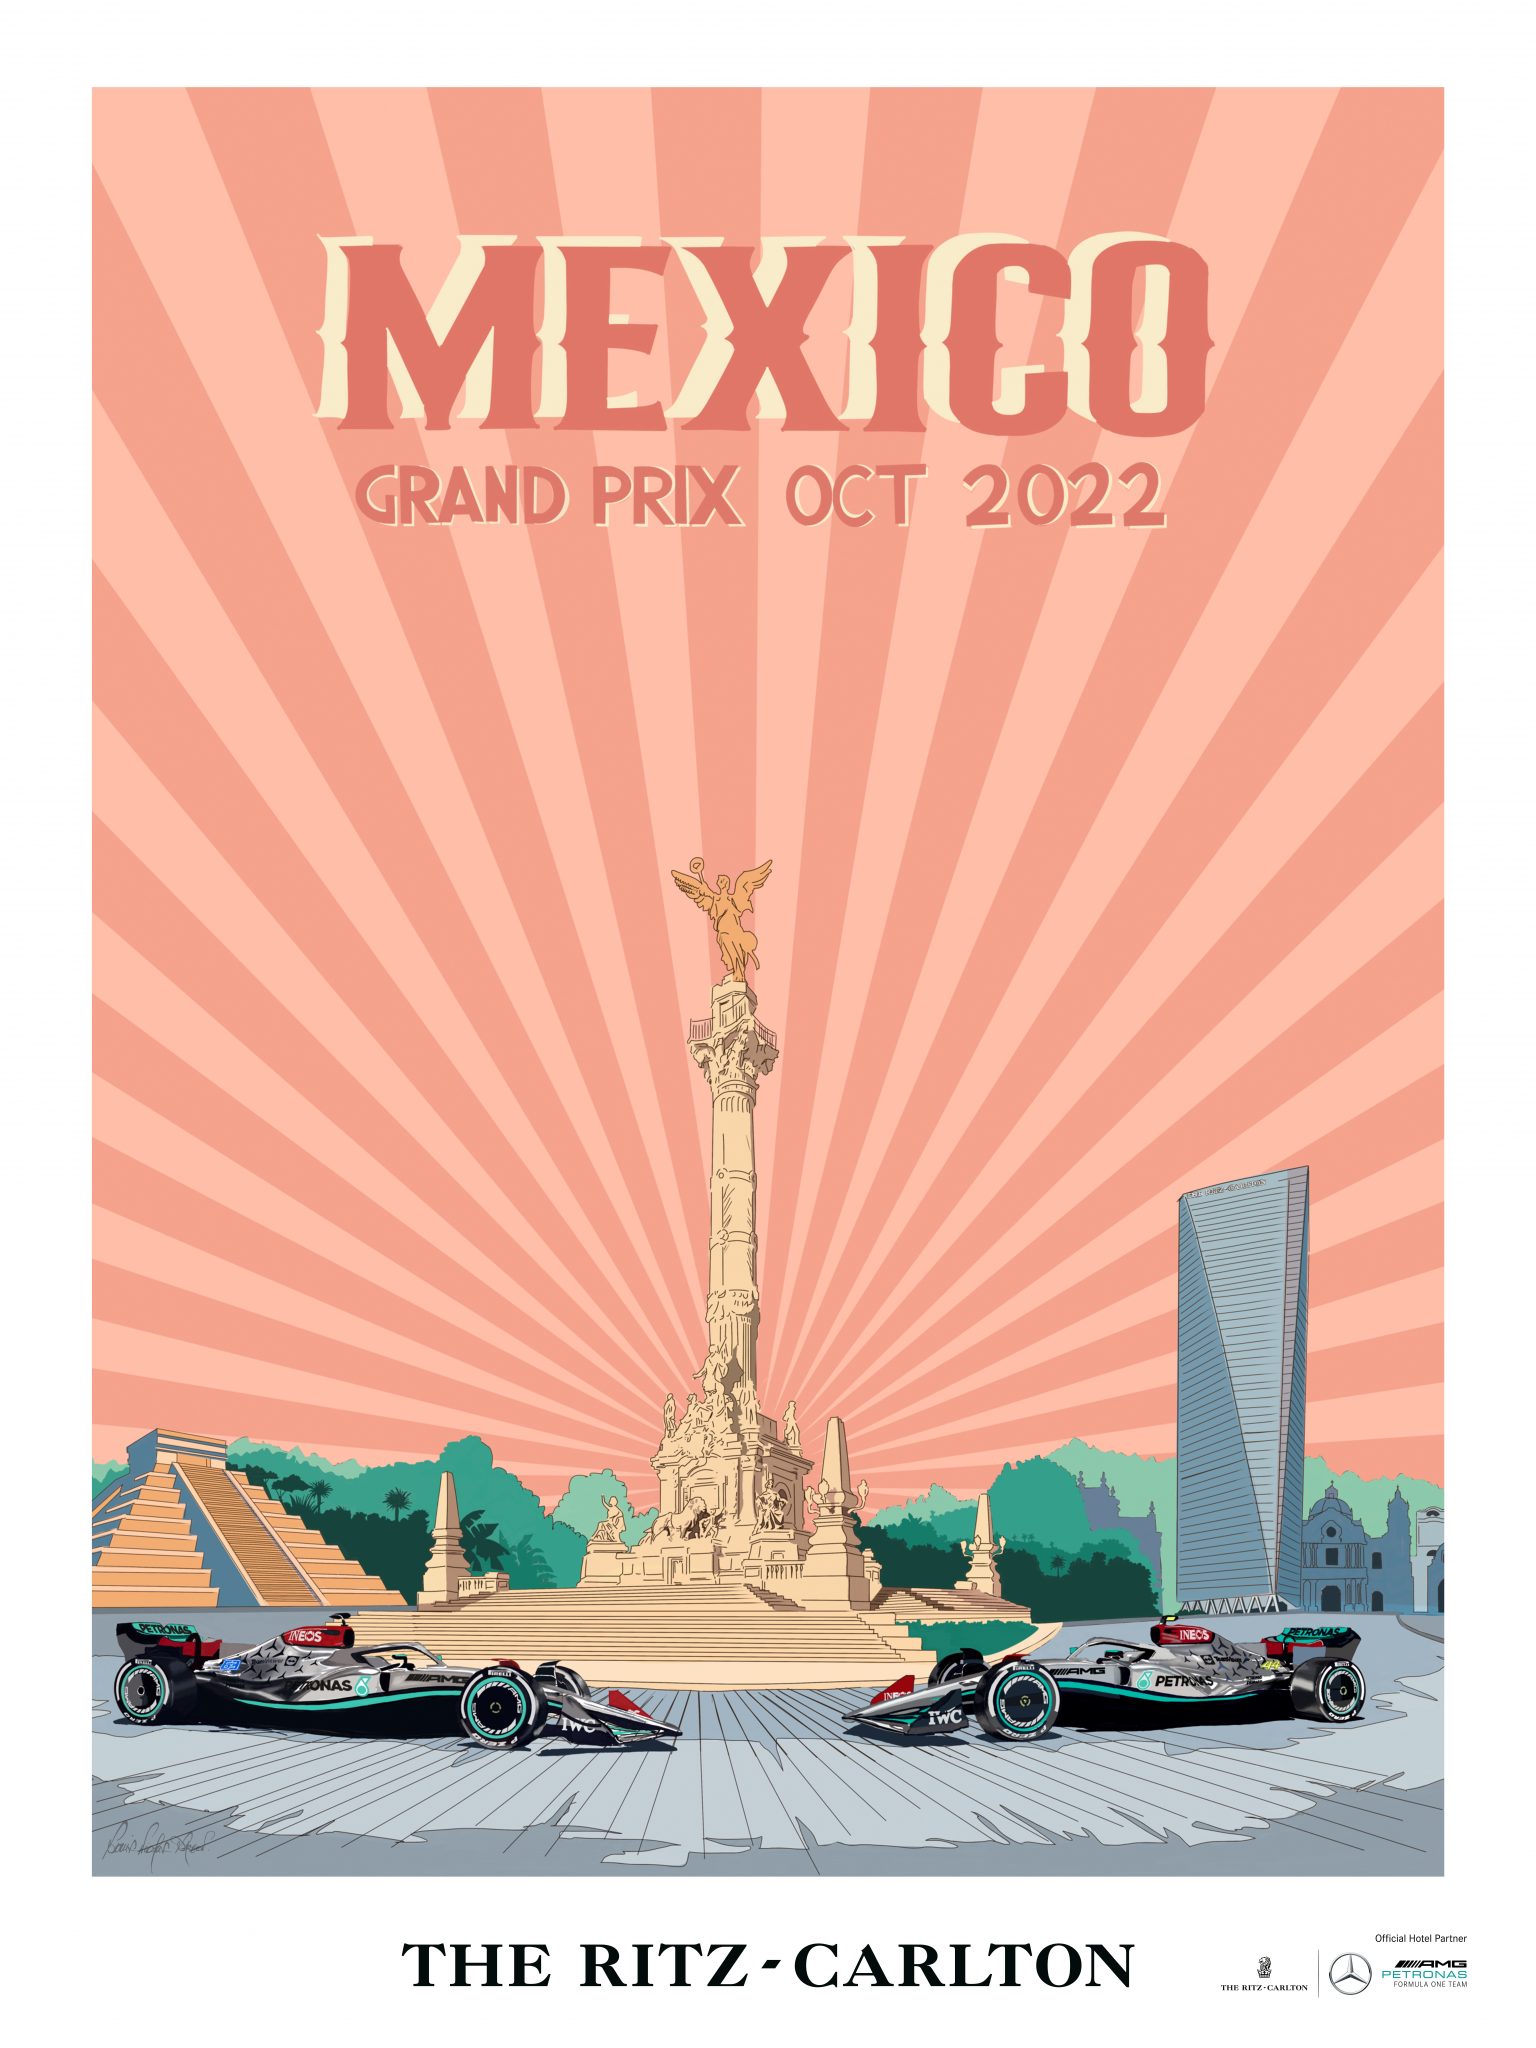 The Mexico special edition Formula 1 poster from Louis-Nicolas Darbon.